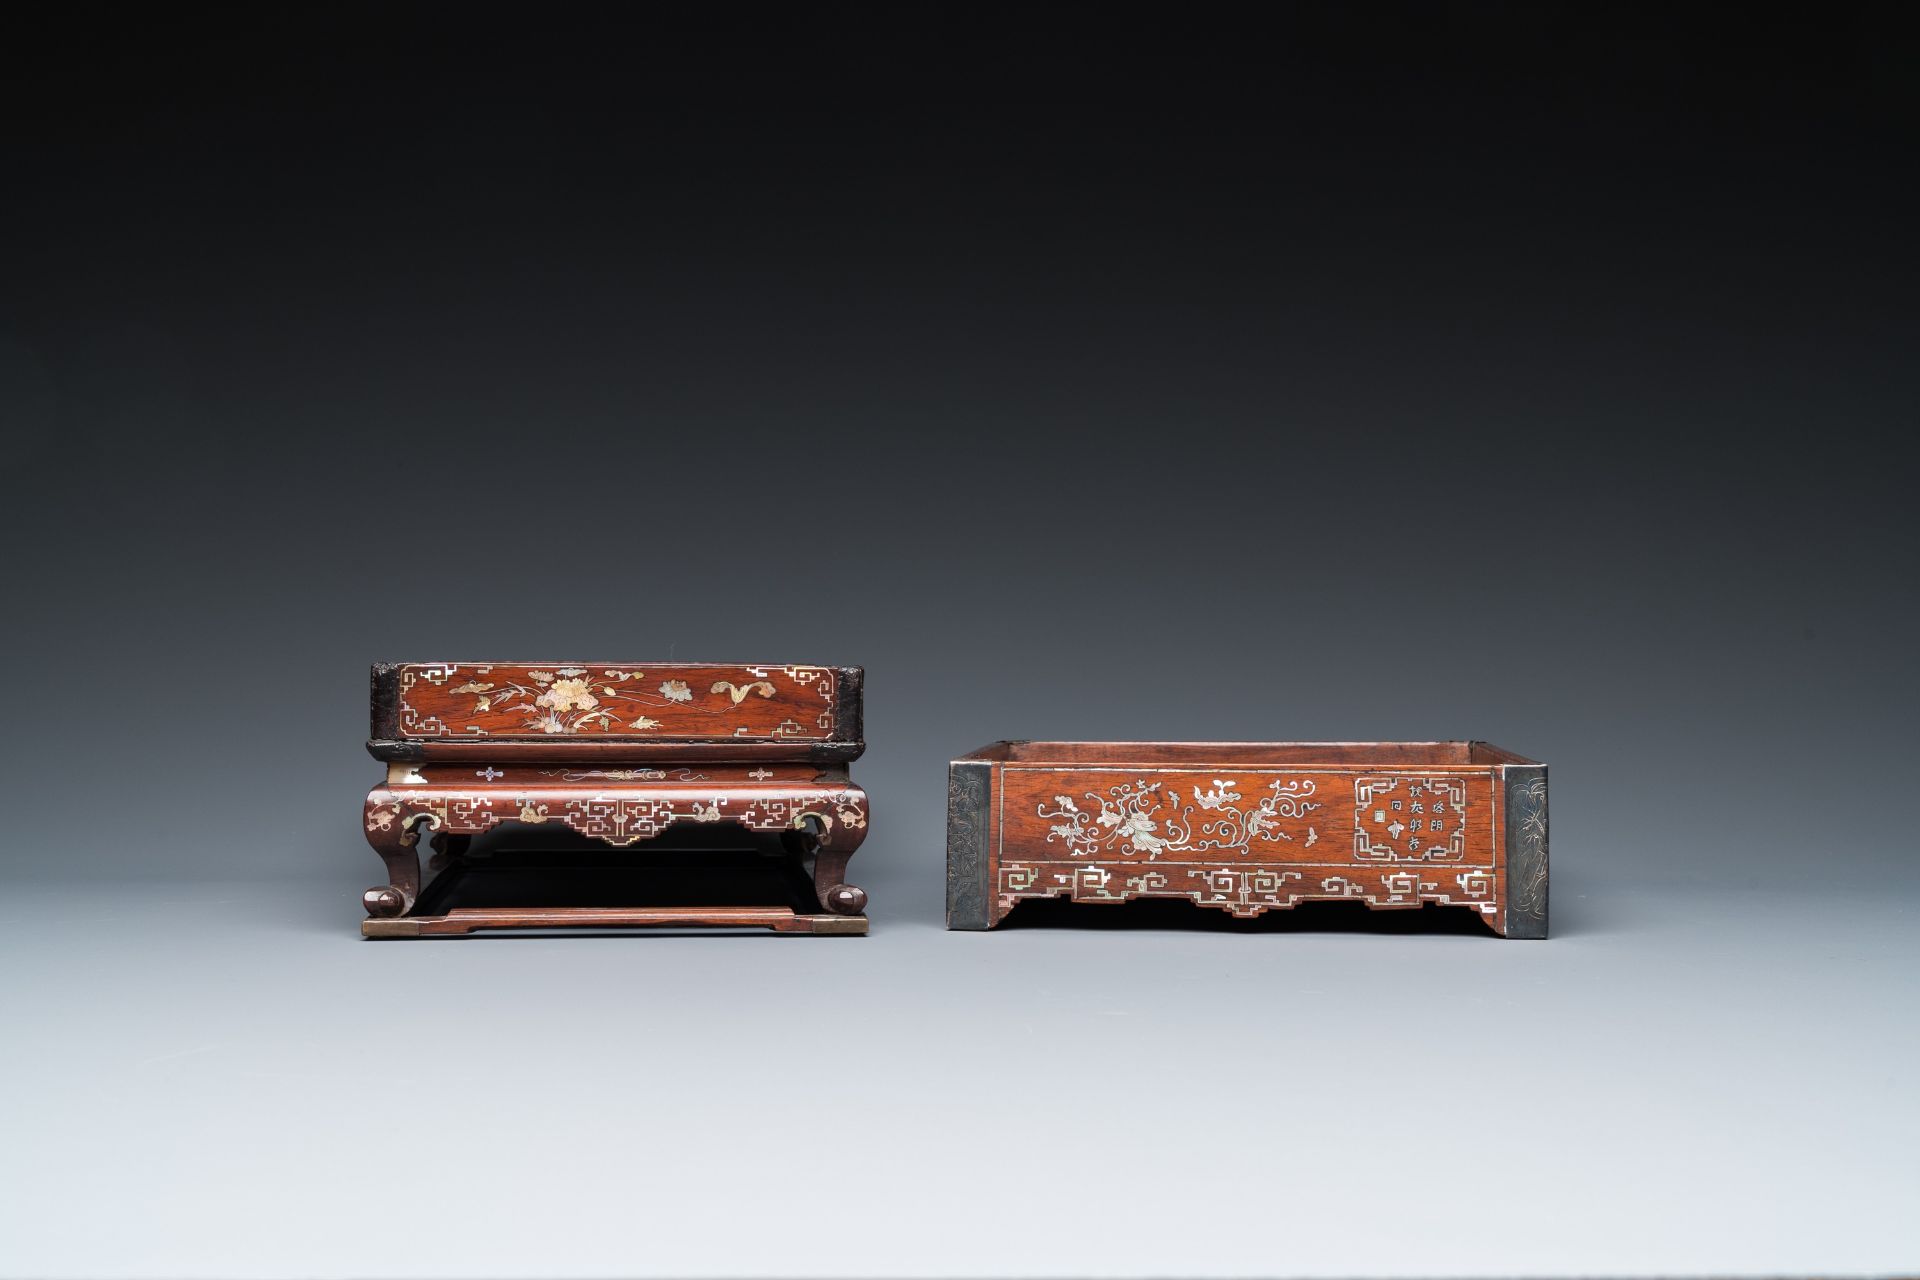 Two mother-of-pearl-inlaid wooden trays, two opium trays and an oval frame, China and/or Vietnam, 19 - Bild 5 aus 9